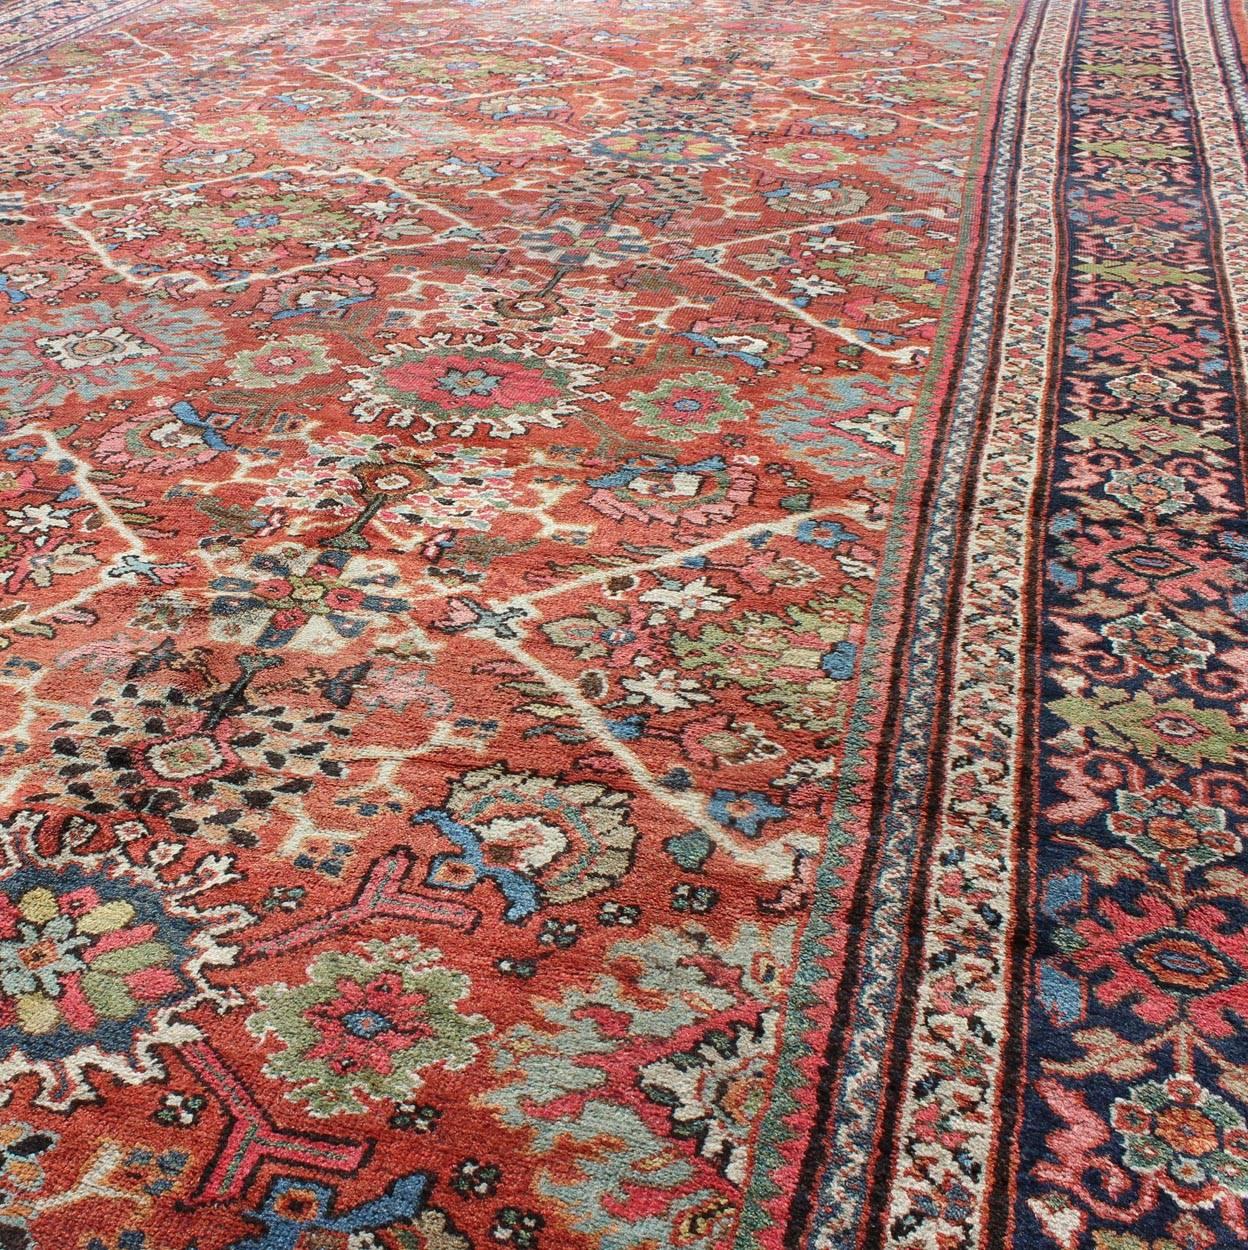 20th Century Antique Persian Sultanabad-Mahal Rug in Jewel Tones & All-Over Geometric Design For Sale